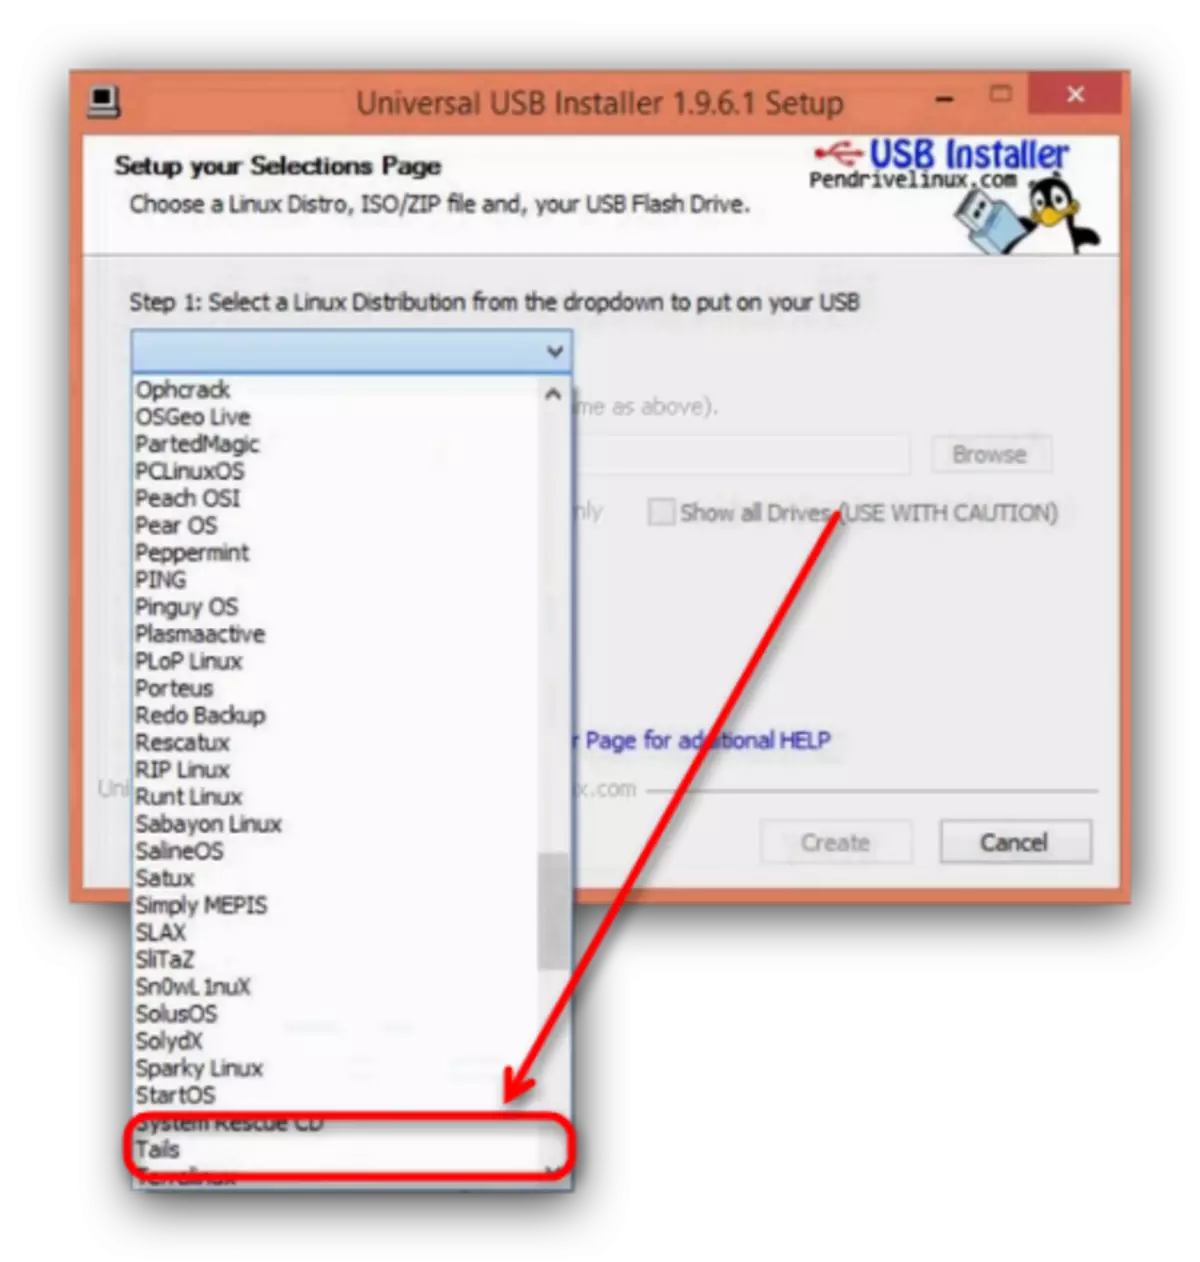 Selecting the Tails system in Universal USB Installer